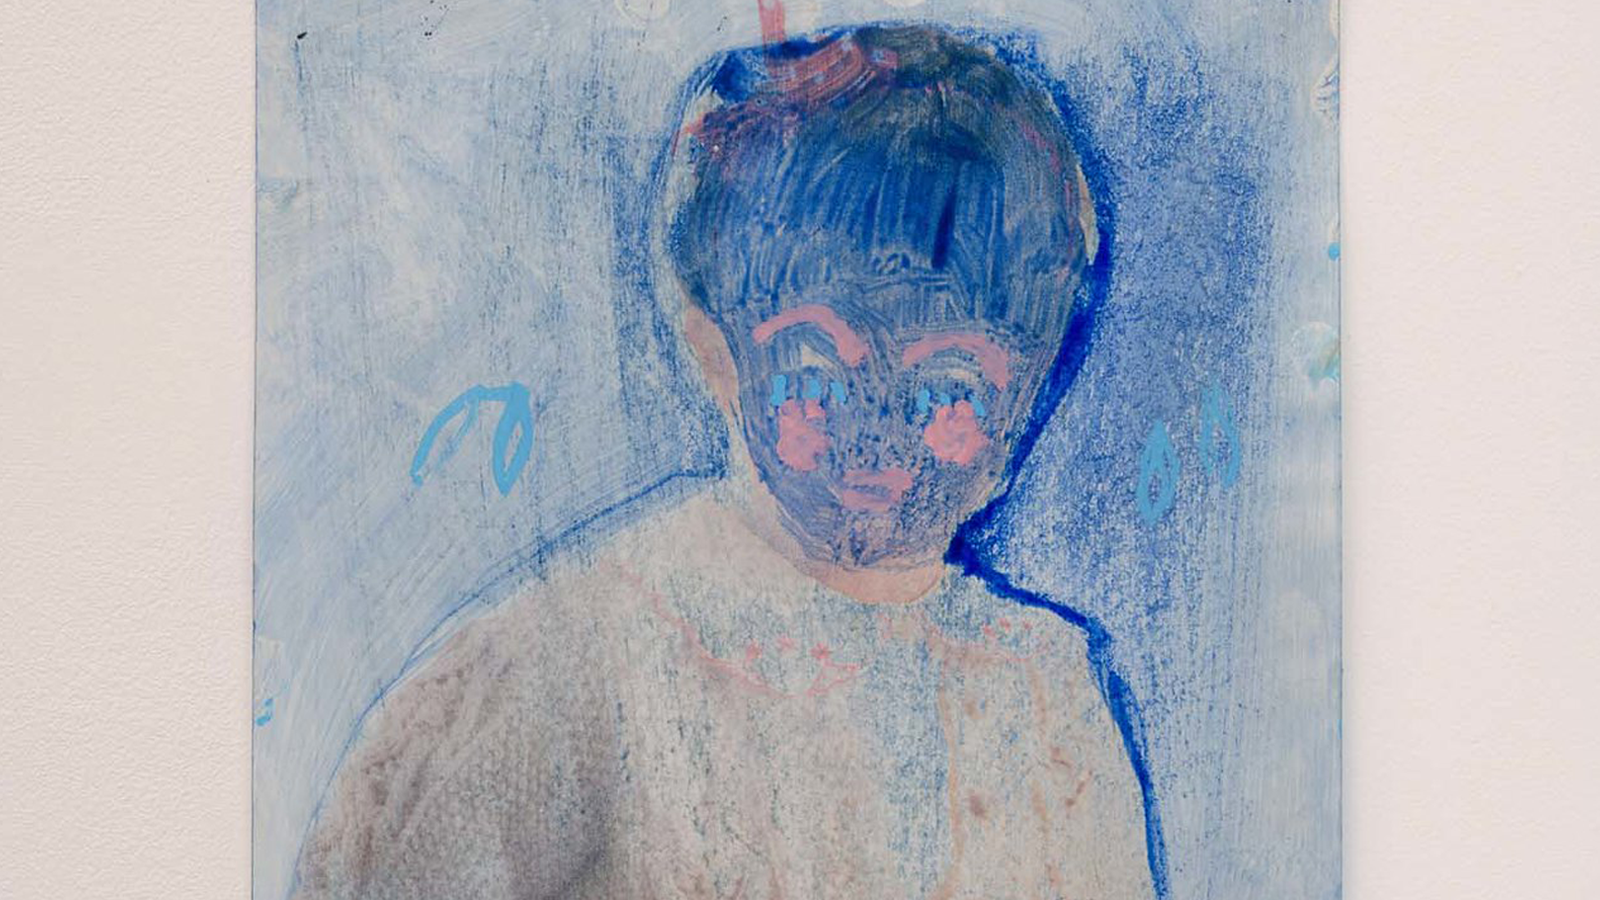 A collage and drawing of a person where the face has been painted blue